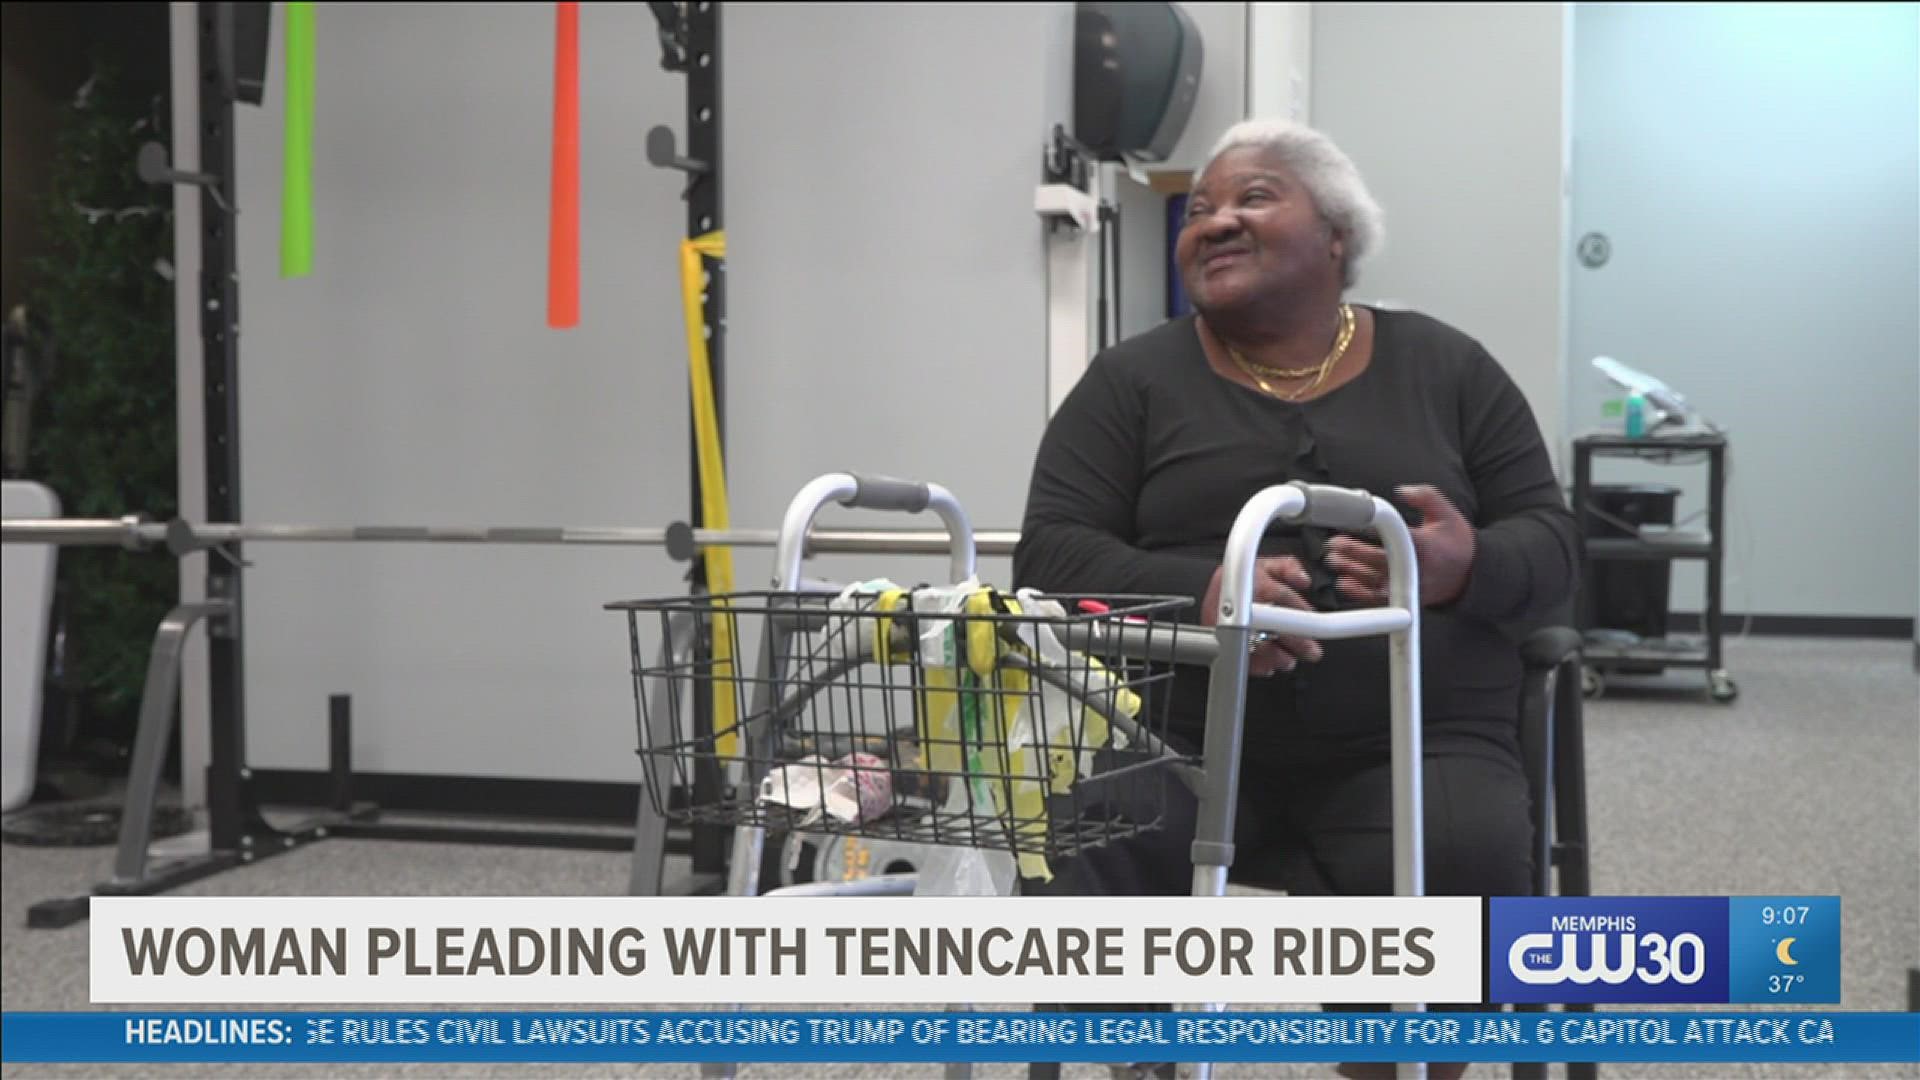 Everlina Benton's ride to the doctor's office is provided through TennCare. But according to her, the service isn't reliable.